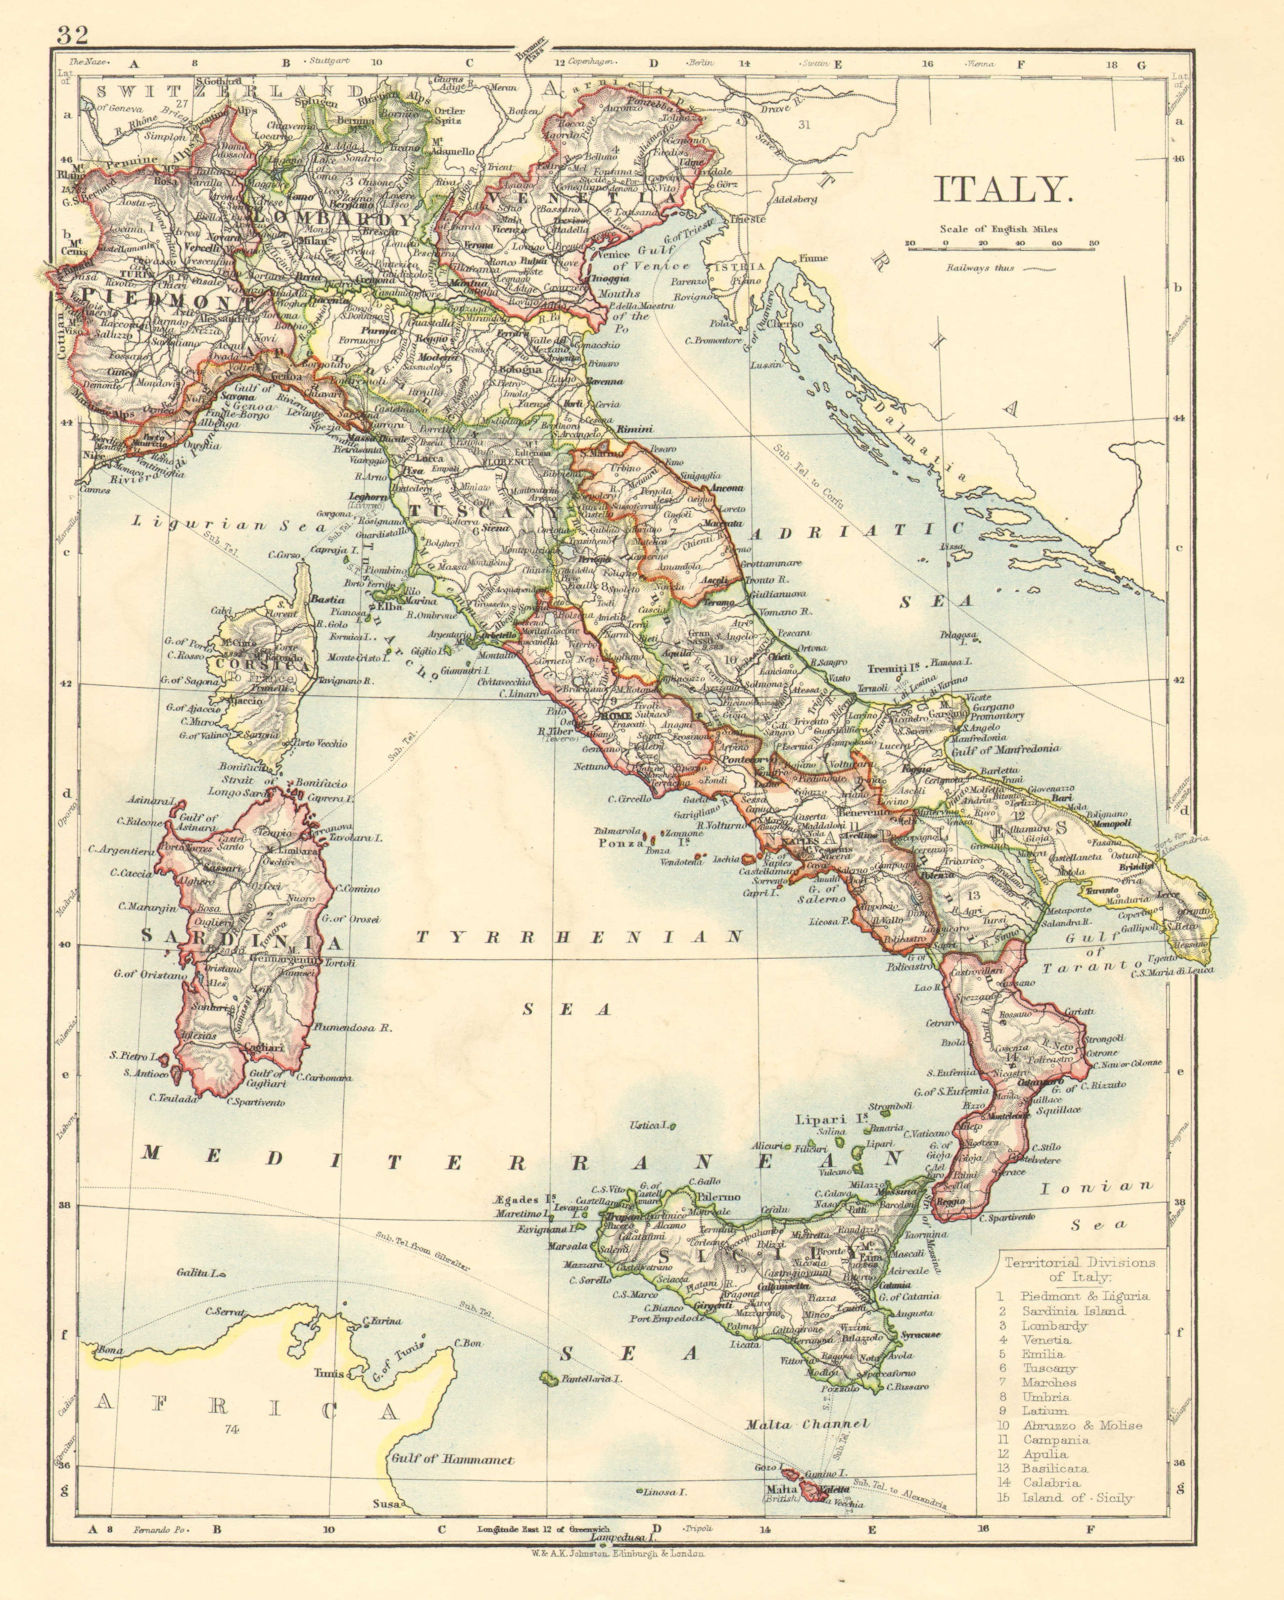 ITALY. Showing states/territorial divisions. JOHNSTON 1899 old antique map